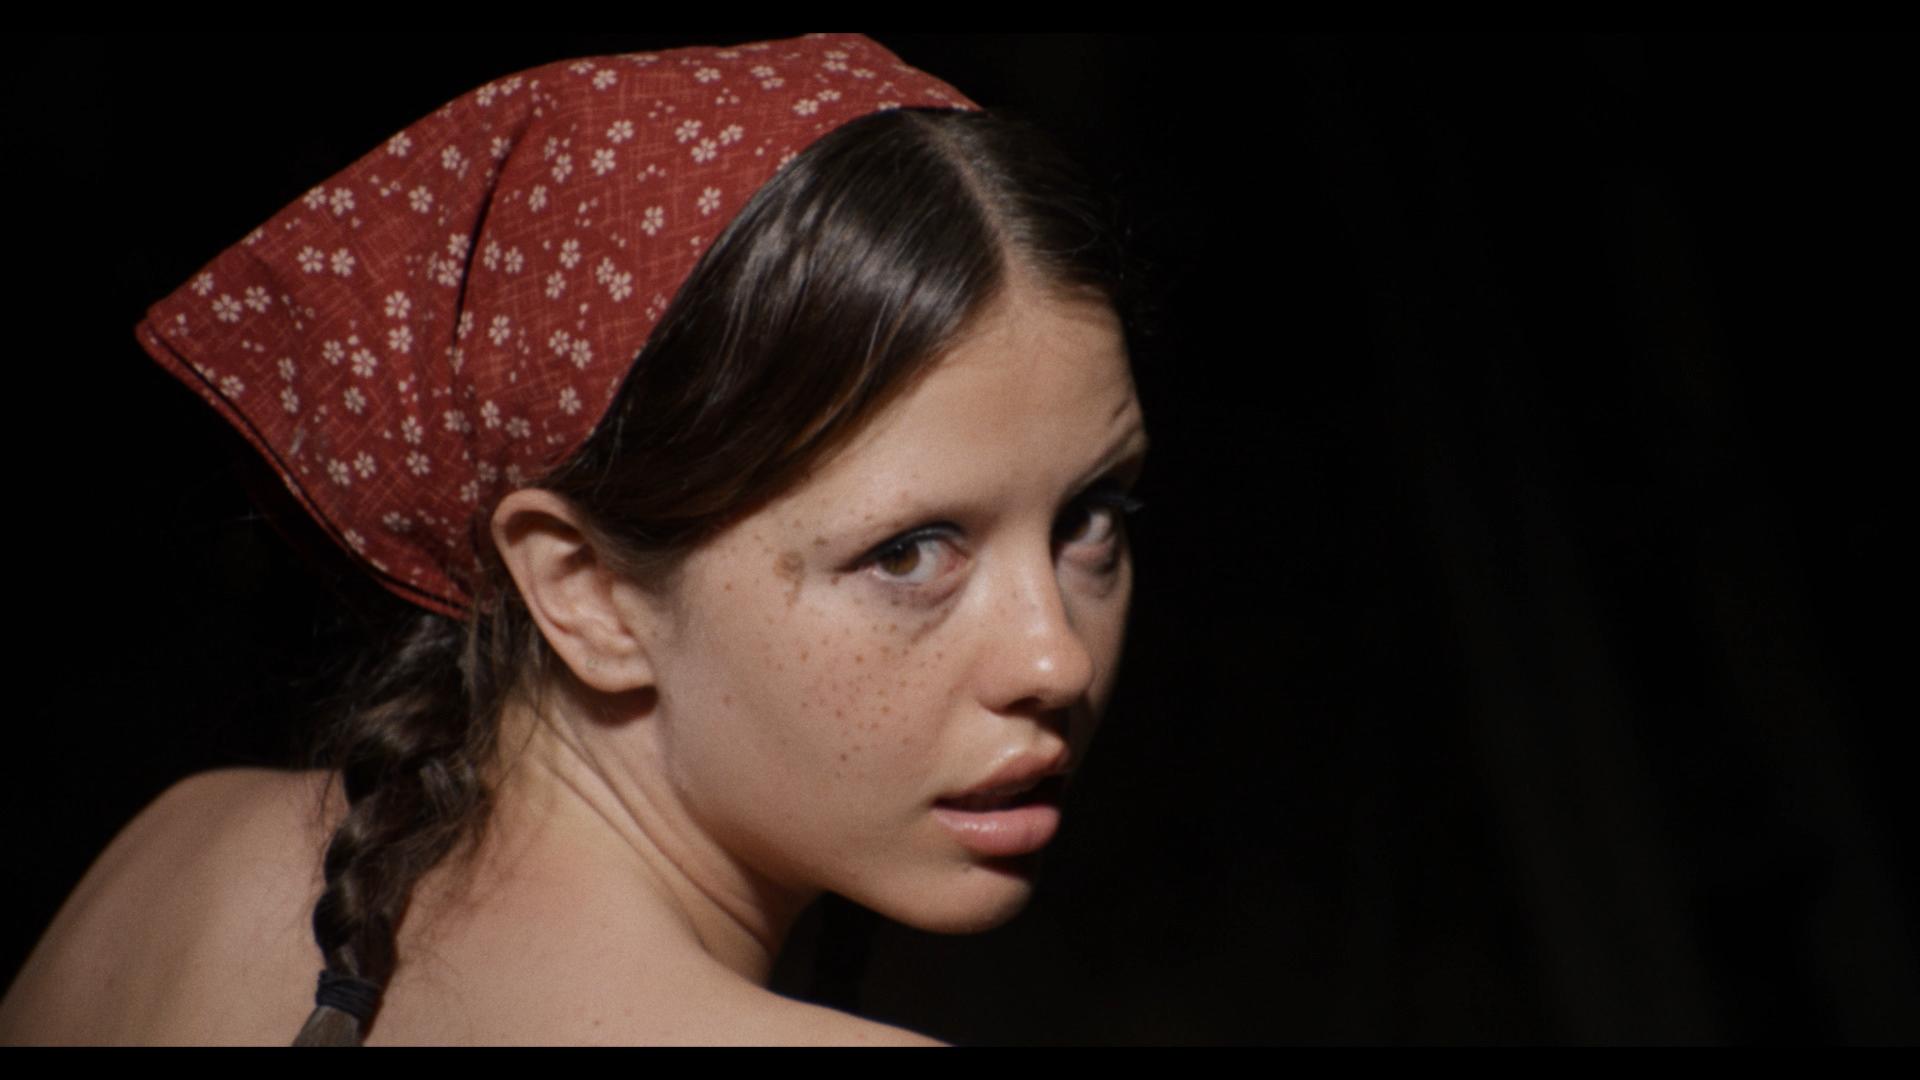 Mia Goth: The Pearl actor says the Oscars snubbing horror is “very political”